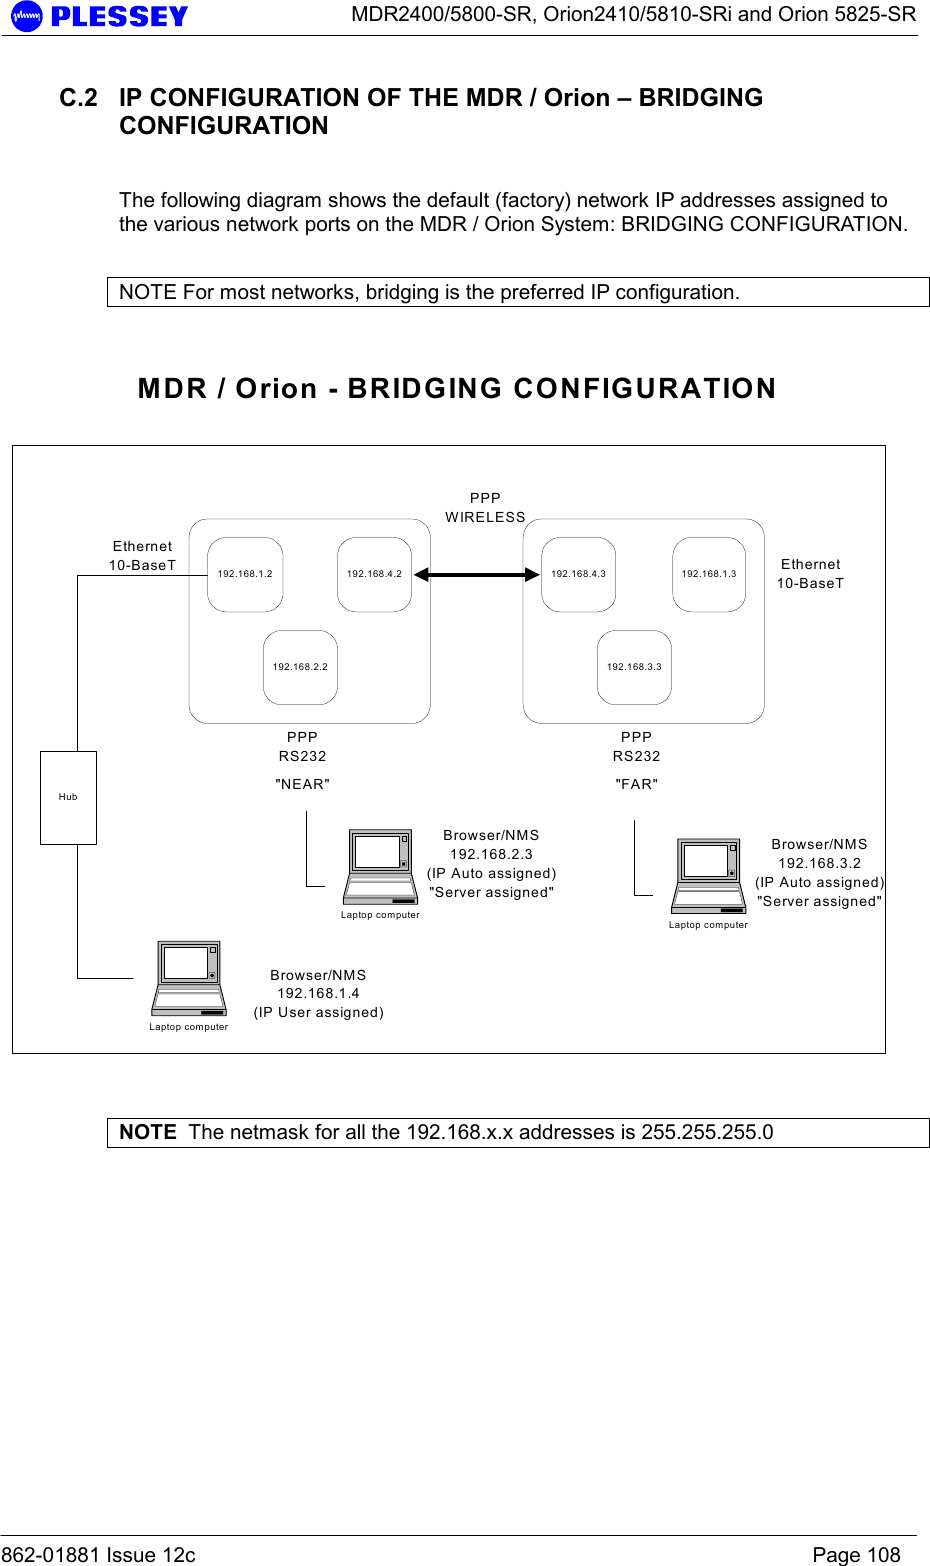      MDR2400/5800-SR, Orion2410/5810-SRi and Orion 5825-SR  862-01881 Issue 12c    Page 108 C.2  IP CONFIGURATION OF THE MDR / Orion – BRIDGING CONFIGURATION  The following diagram shows the default (factory) network IP addresses assigned to the various network ports on the MDR / Orion System: BRIDGING CONFIGURATION.    NOTE For most networks, bridging is the preferred IP configuration.  192.168.1.2 192.168.4.2192.168.2.2192.168.4.3 192.168.1.3192.168.3.3Ethernet10-BaseTPPPRS232PPPWIRELESSPPPRS232Ethernet10-BaseT&quot;NEAR&quot; &quot;FAR&quot;Laptop computerBrowser/NMS192.168.1.4(IP User assigned)HubMDR / Orion - BRIDGING CONFIGURATIONLaptop computerBrowser/NMS192.168.3.2(IP Auto assigned)&quot;Server assigned&quot;Laptop computerBrowser/NMS192.168.2.3(IP Auto assigned)&quot;Server assigned&quot;  NOTE  The netmask for all the 192.168.x.x addresses is 255.255.255.0  